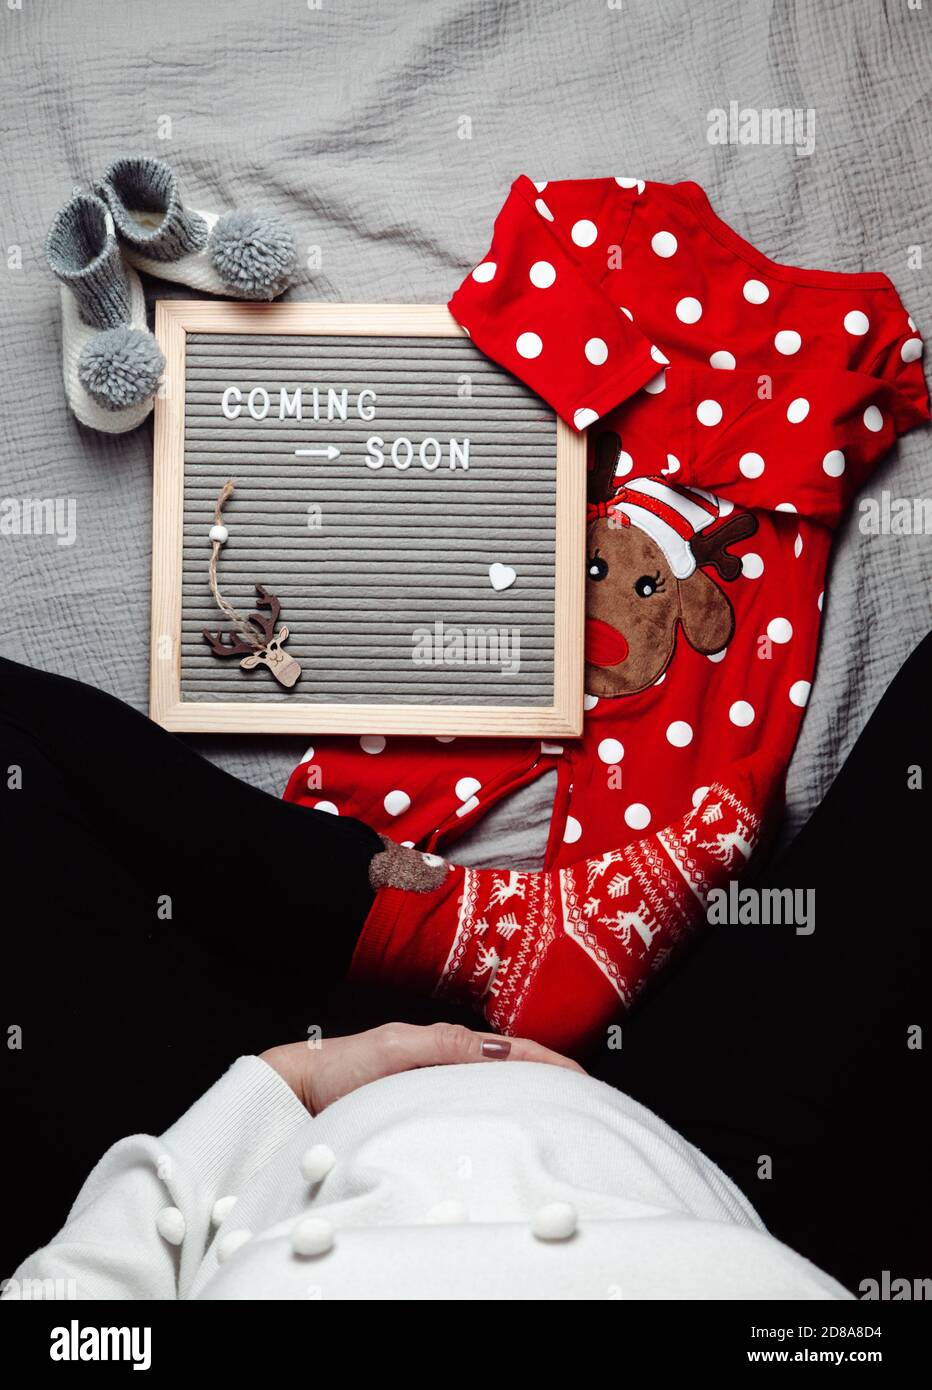 Pregnant woman sitting with a coming soon Baby announcement sign. Coming soon Christmas concept. Pregnancy belly. Blank space. Stock Photo